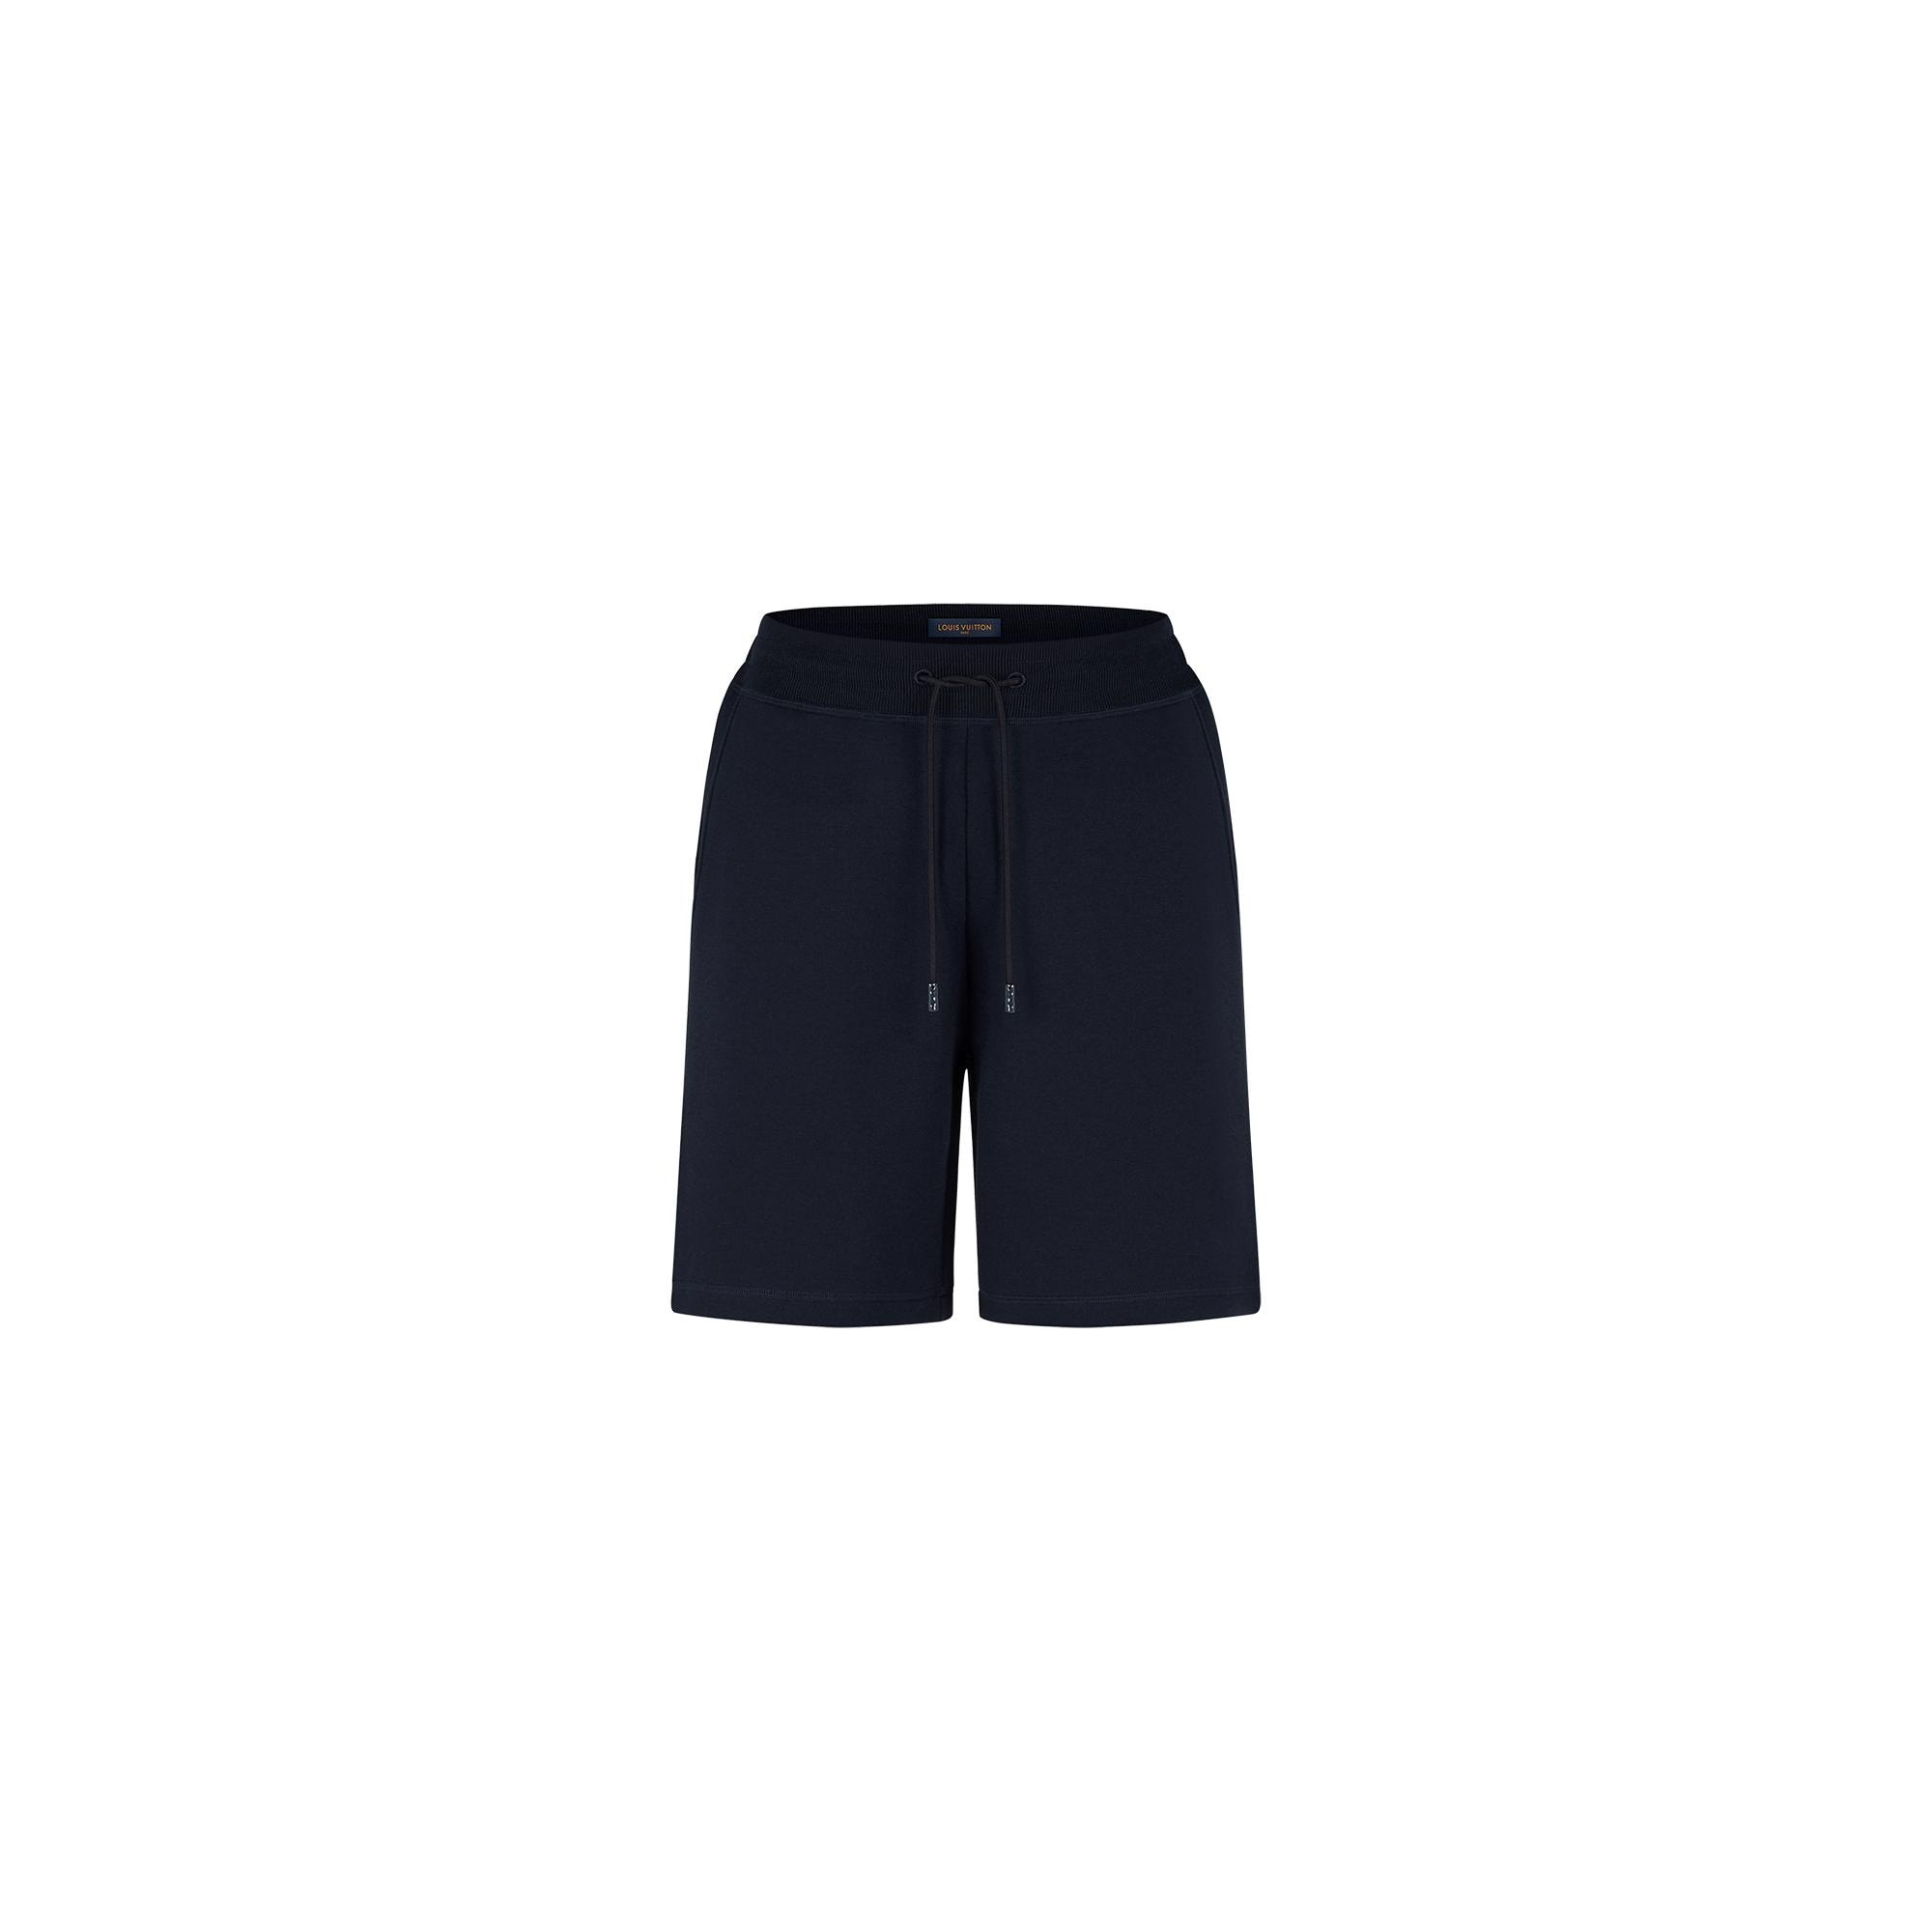 Double Face Travel Shorts - 1